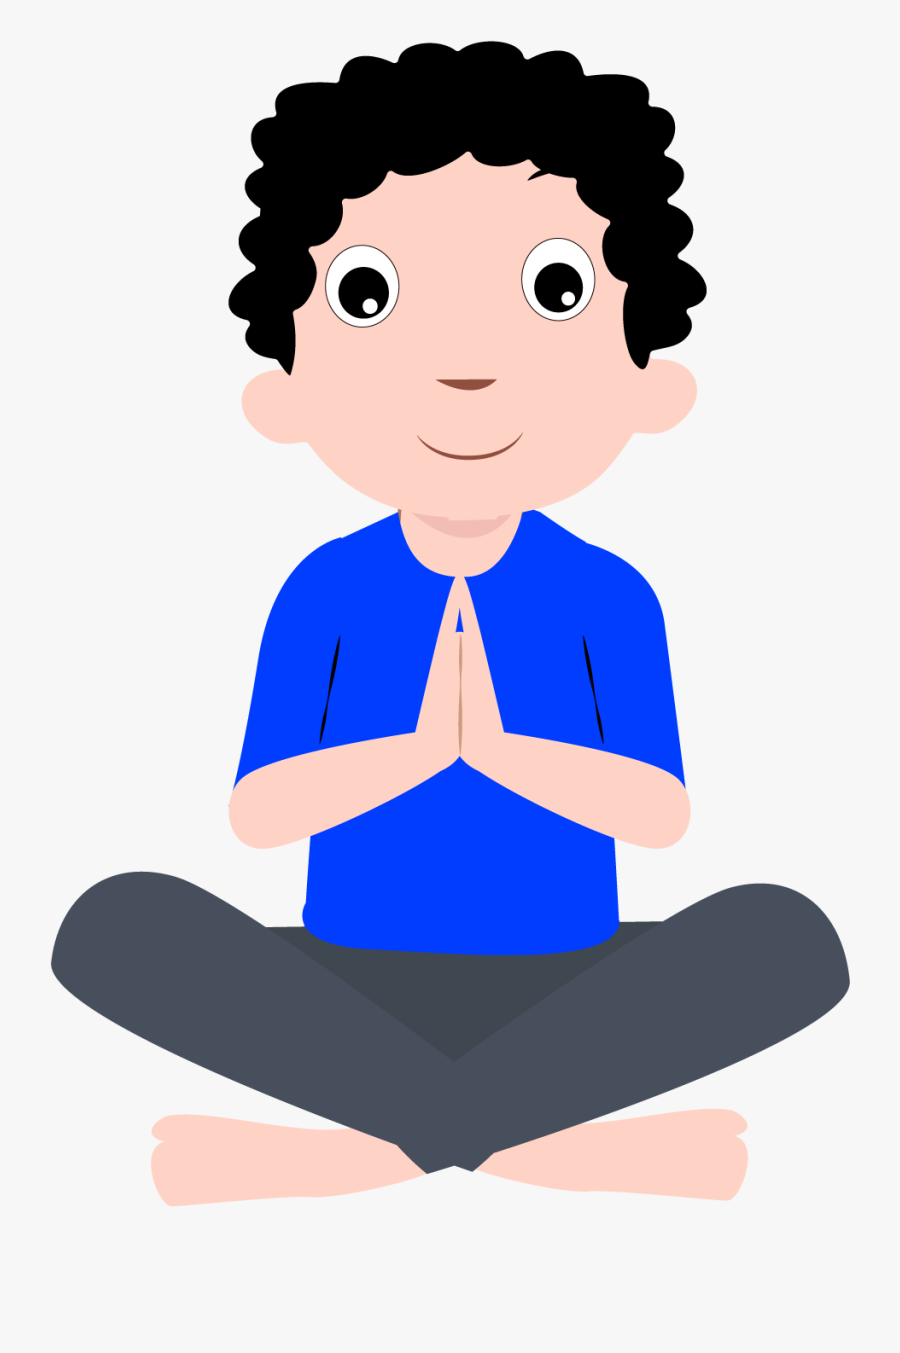 Kids Namaste Clipart Png , Free Transparent Clipart - ClipartKey